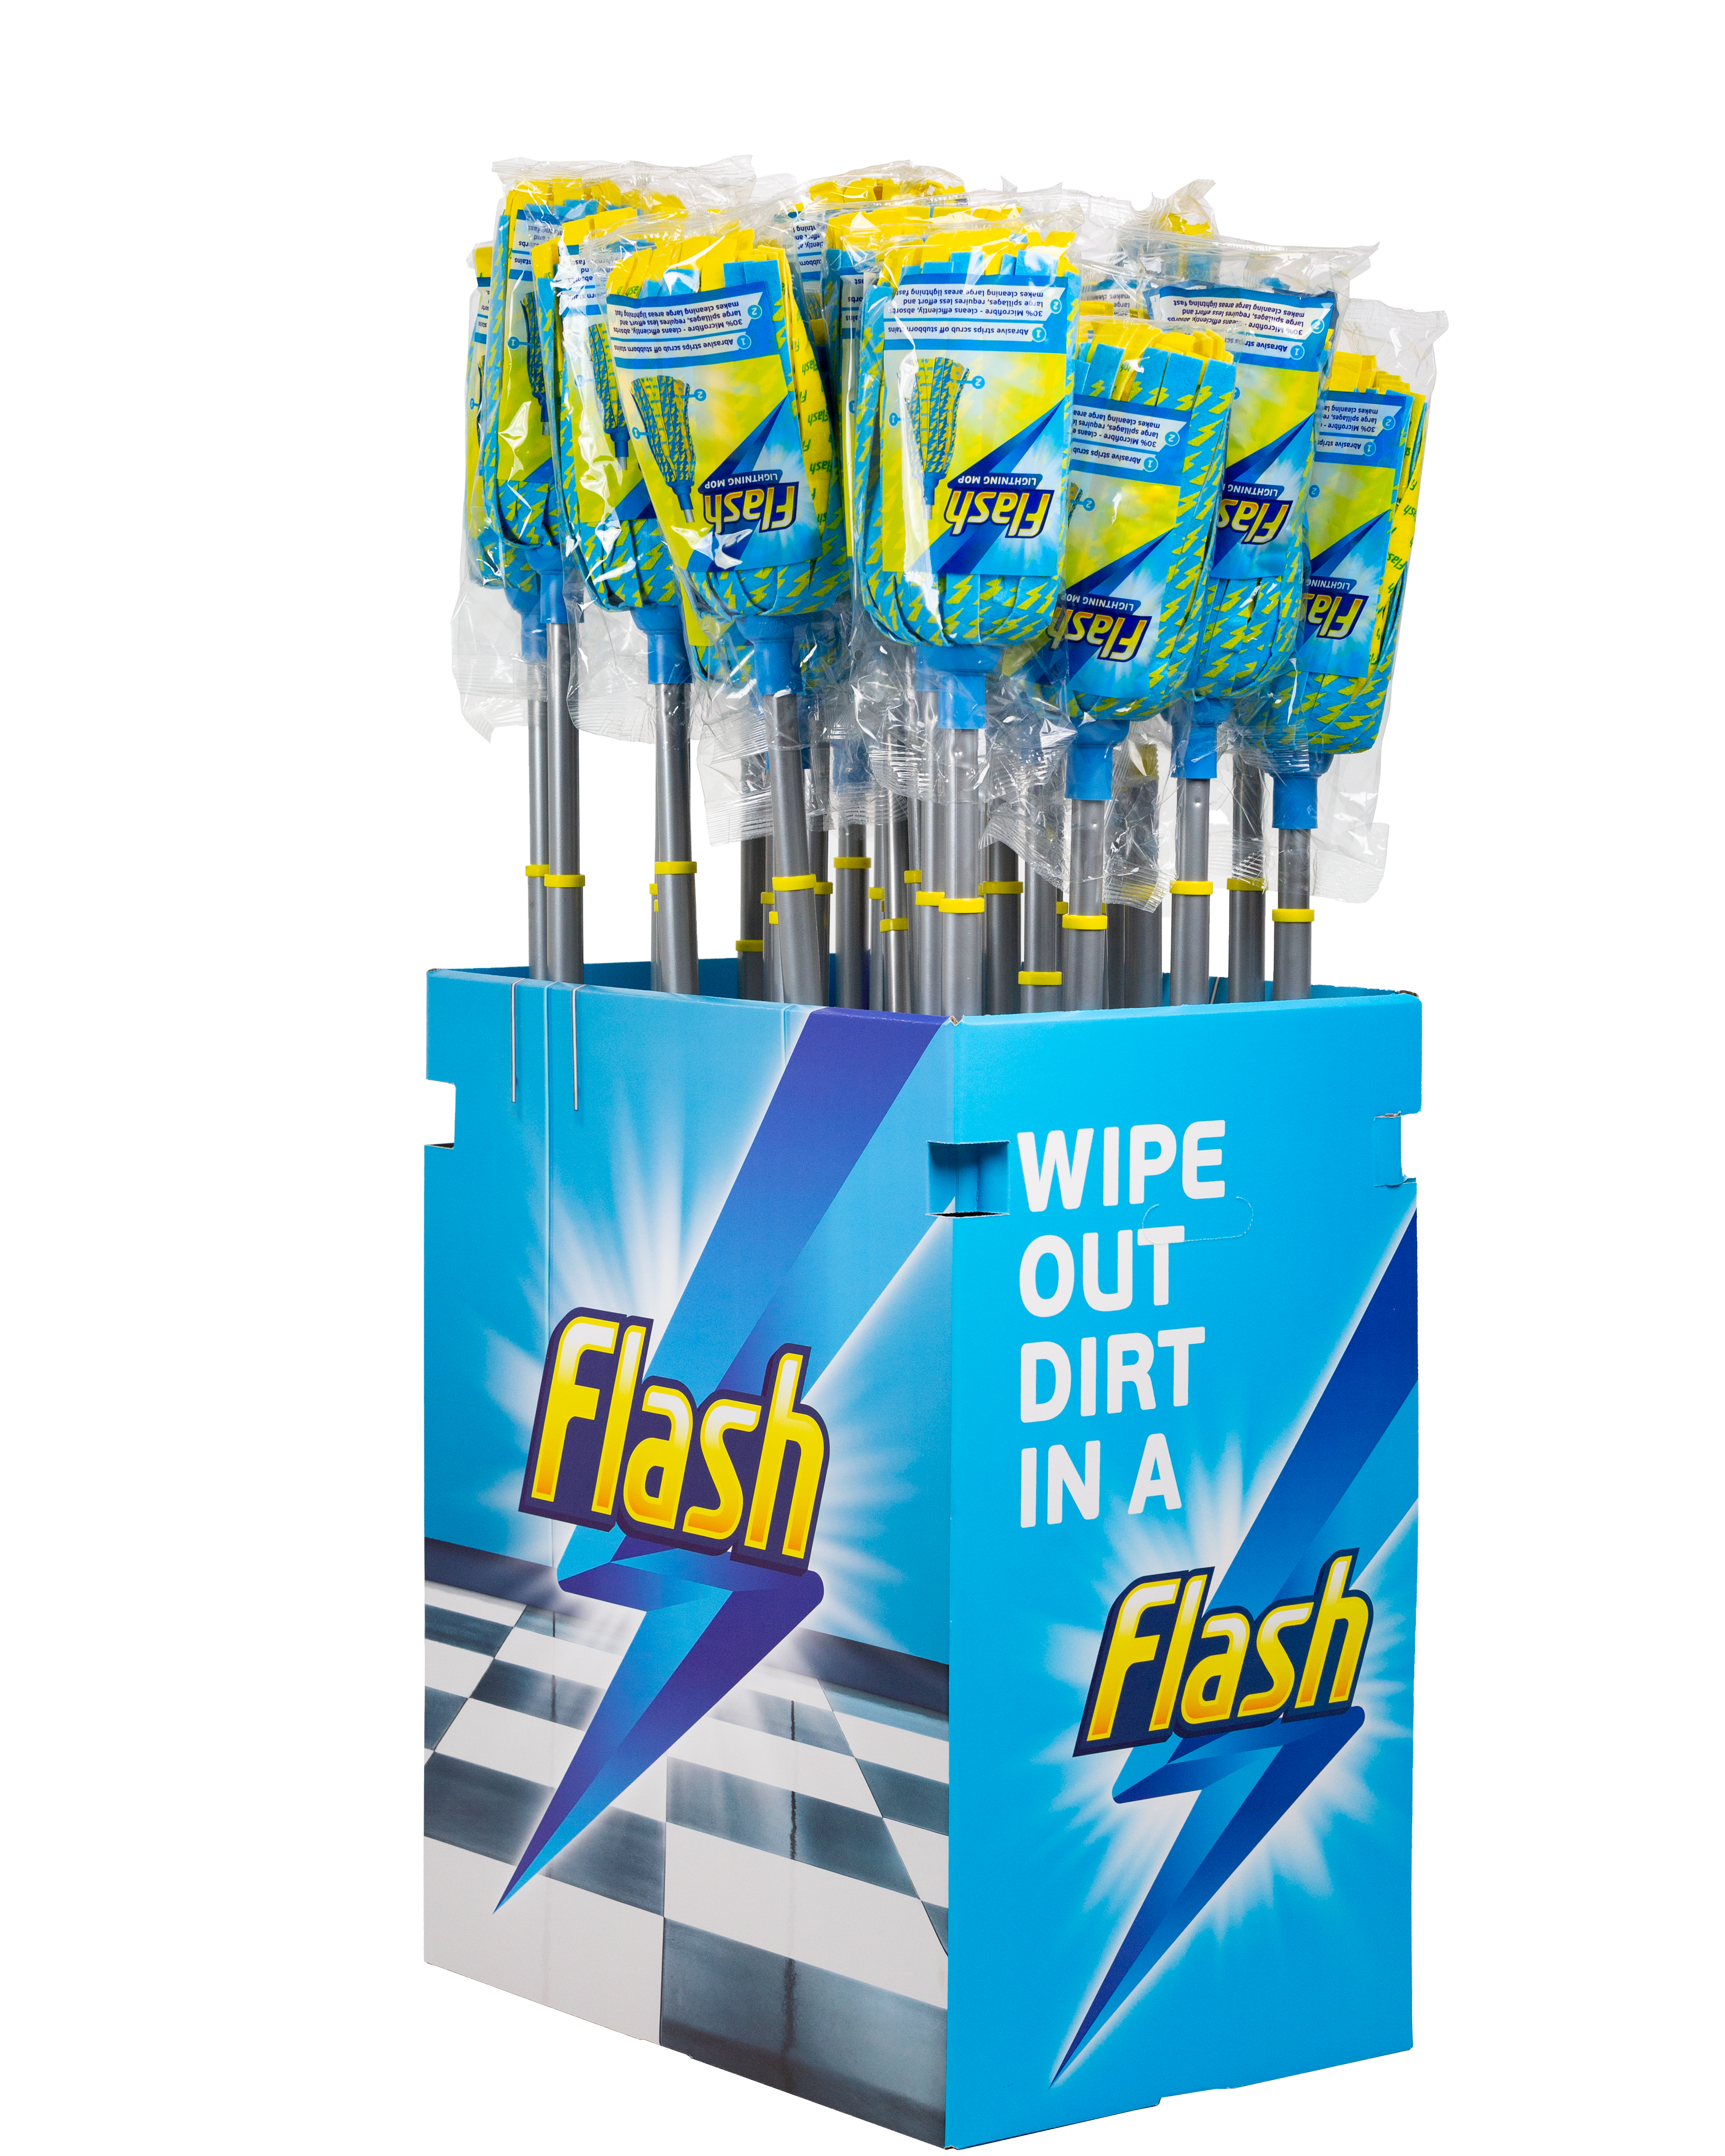 A Display Unit Filled with Flash Lightning Mops